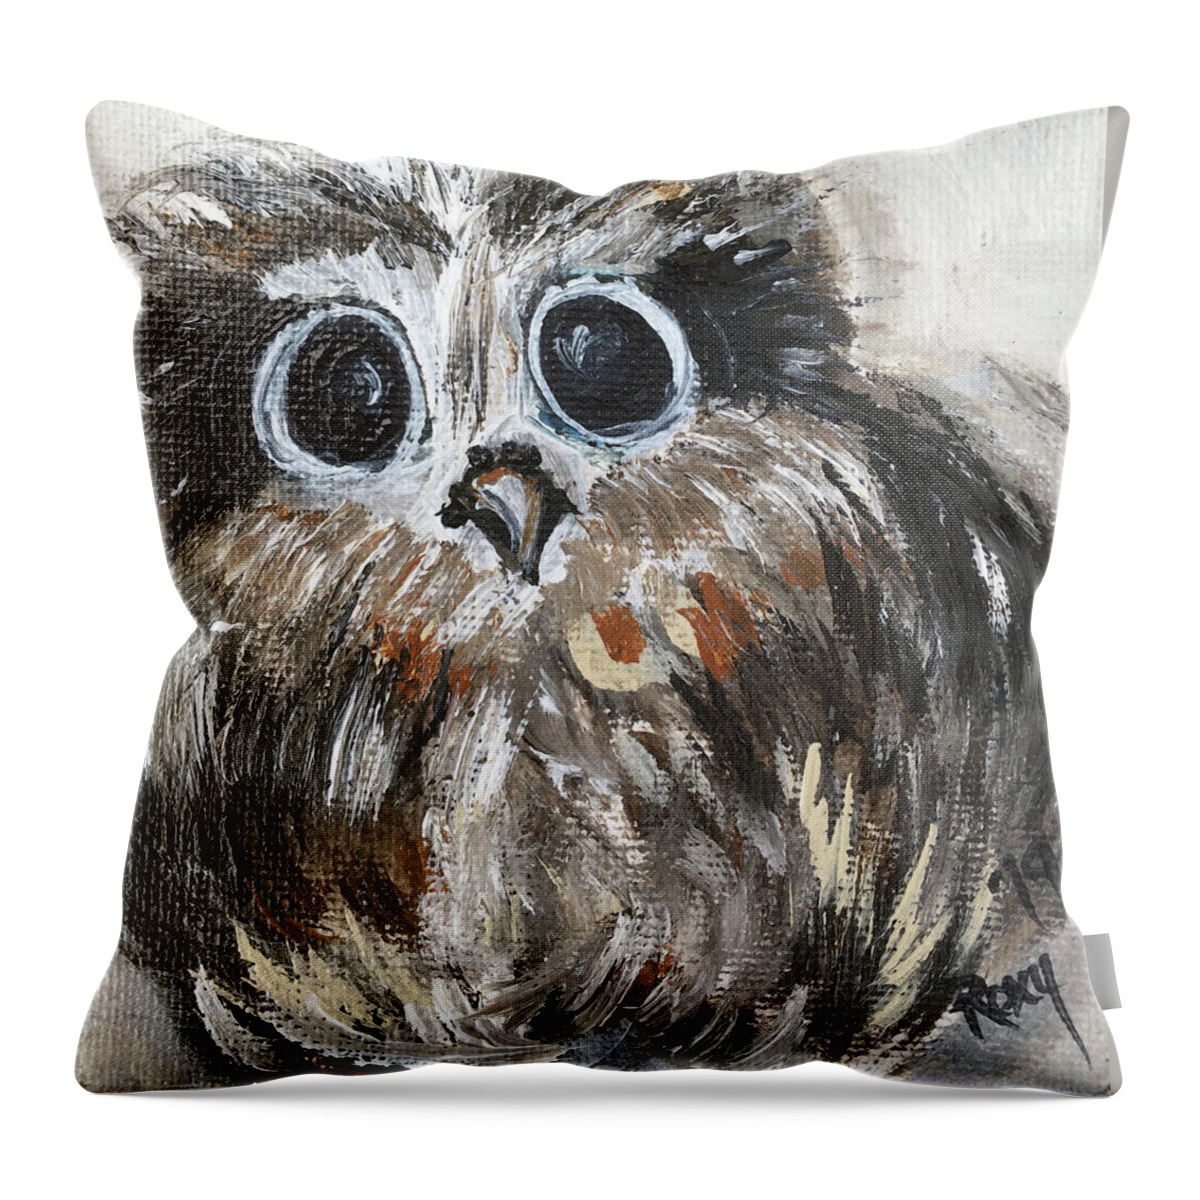 Owl Throw Pillow featuring the painting Big Eyes Baby Owl by Roxy Rich